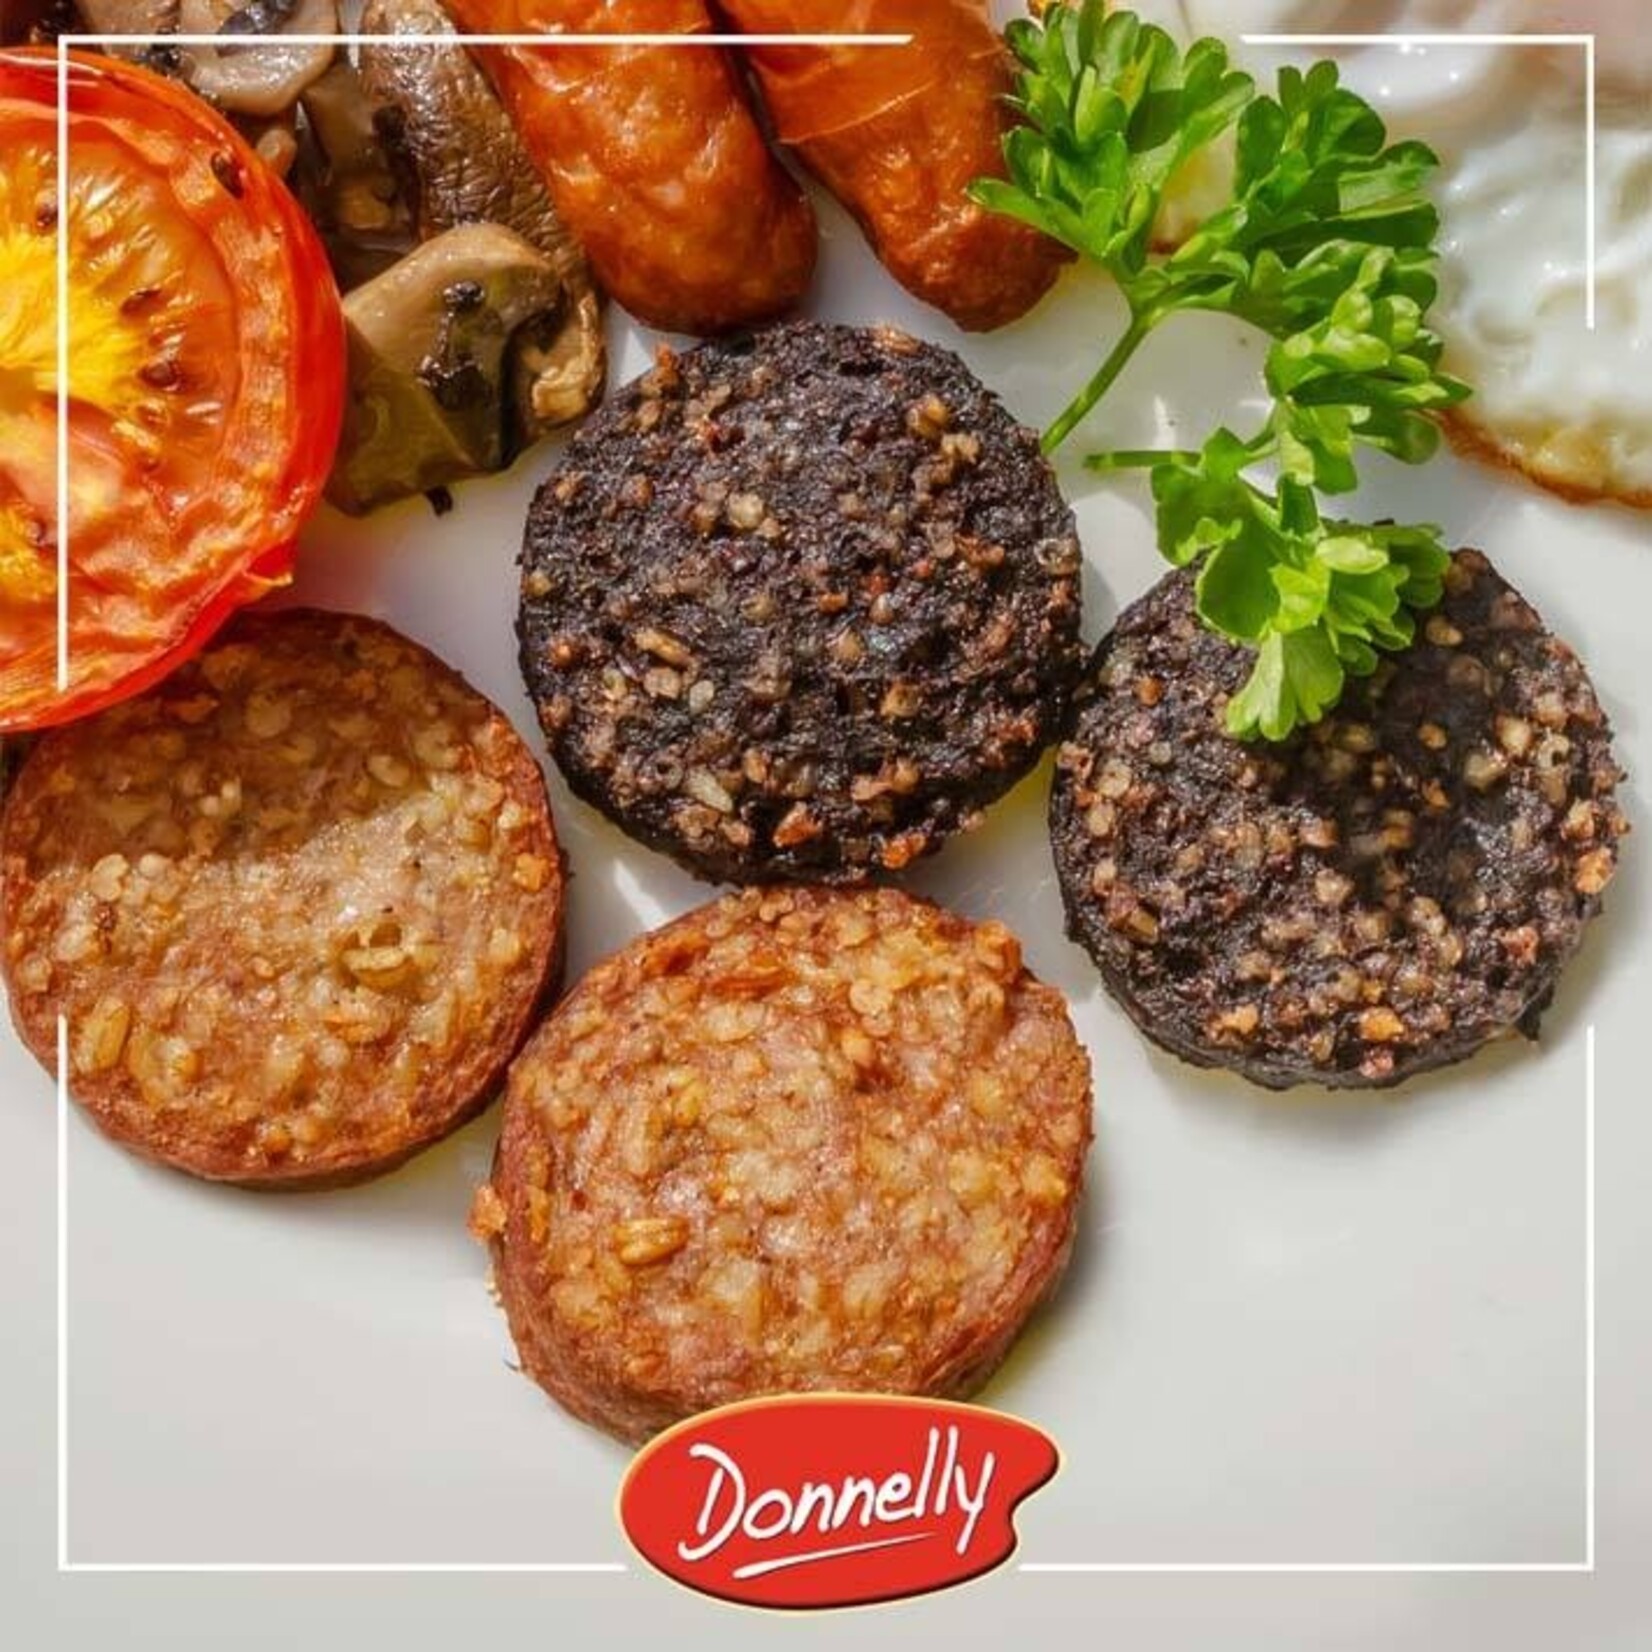 Donnelly Donnelly Black Pudding 226g (8oz)